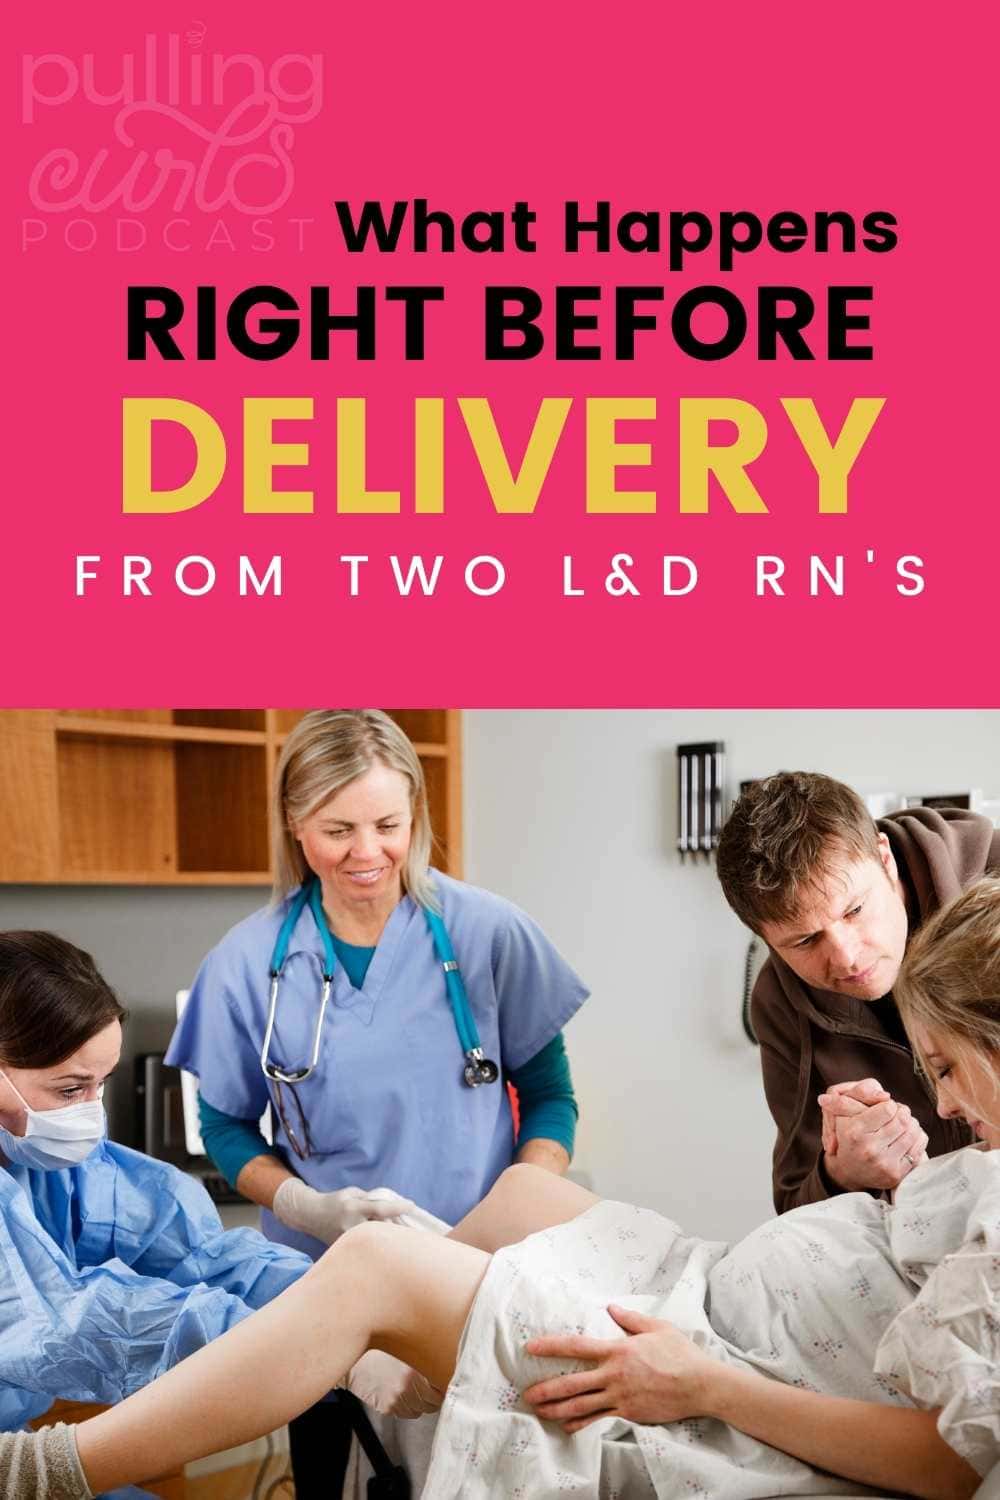 what happens right before delivery / woman giving birth via @pullingcurls